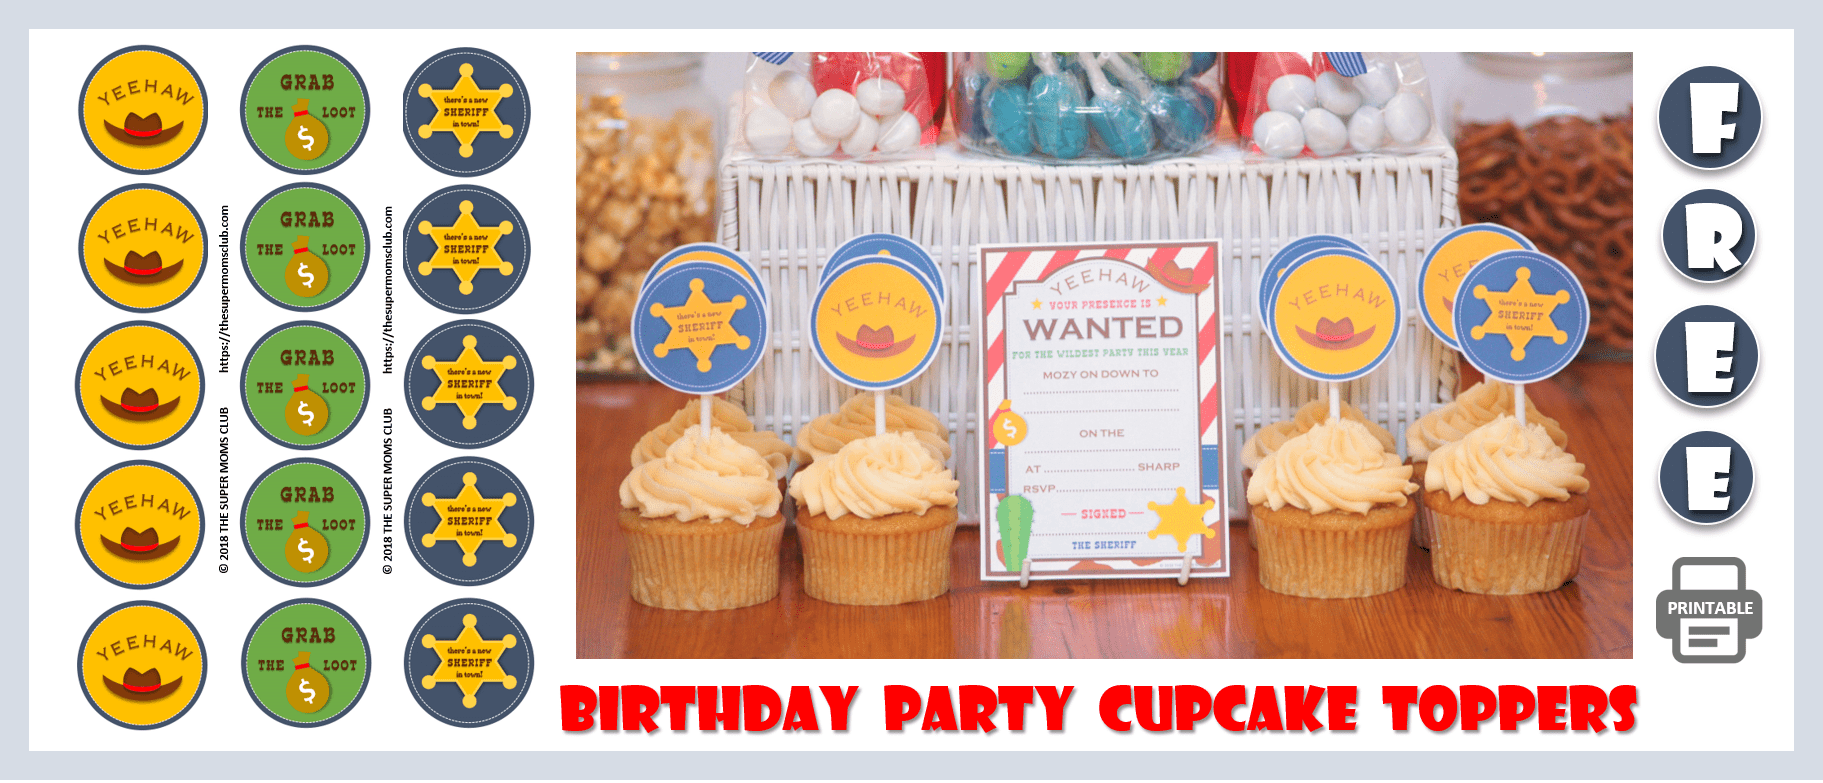 Cowboy Themed Birthday Party FREE PRINTABLE Cupcake Toppers - The Super Moms Club